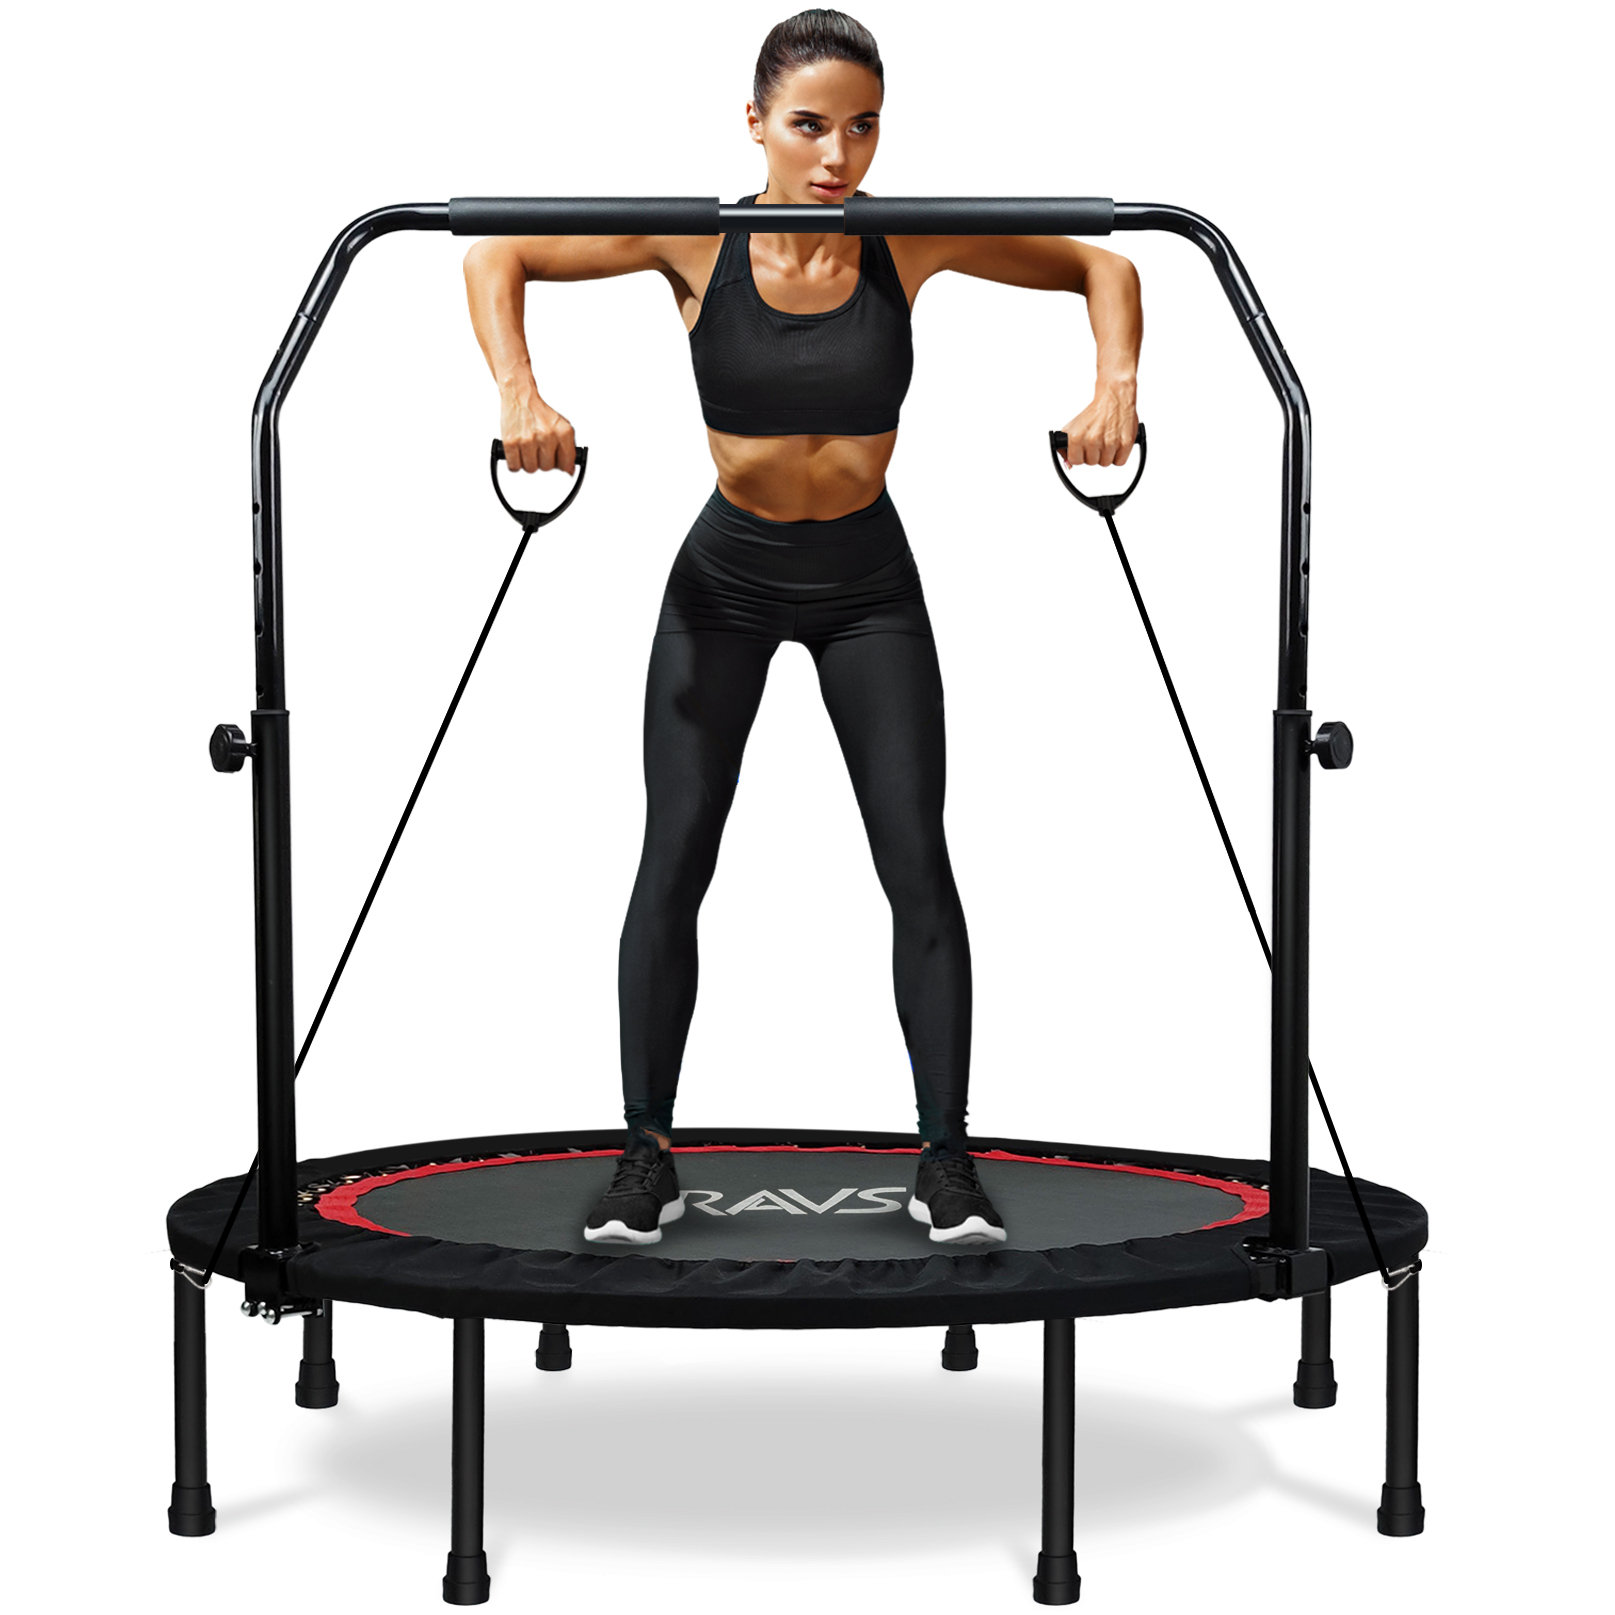 HOMEOW 40 440lbs Mini Trampoline for Adults with Adjustable Handle Silent Fitness Rebounder Indoor/Garden Workout 440lbs Weight Limit 